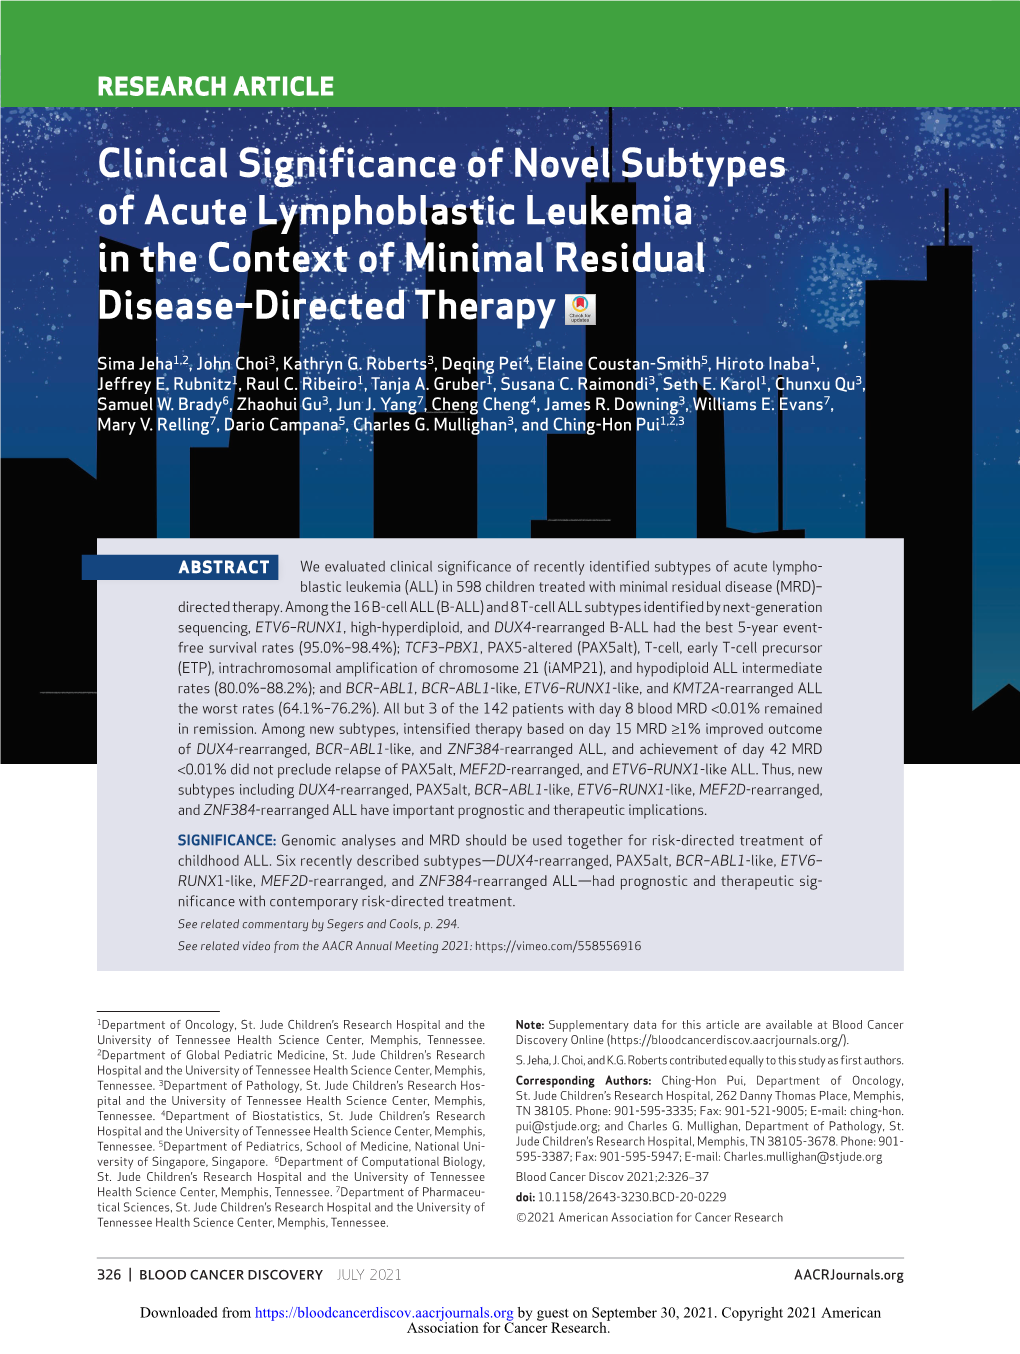 Clinical Significance of Novel Subtypes of Acute Lymphoblastic Leukemia in the Context of Minimal Residual Disease–Directed Therapy